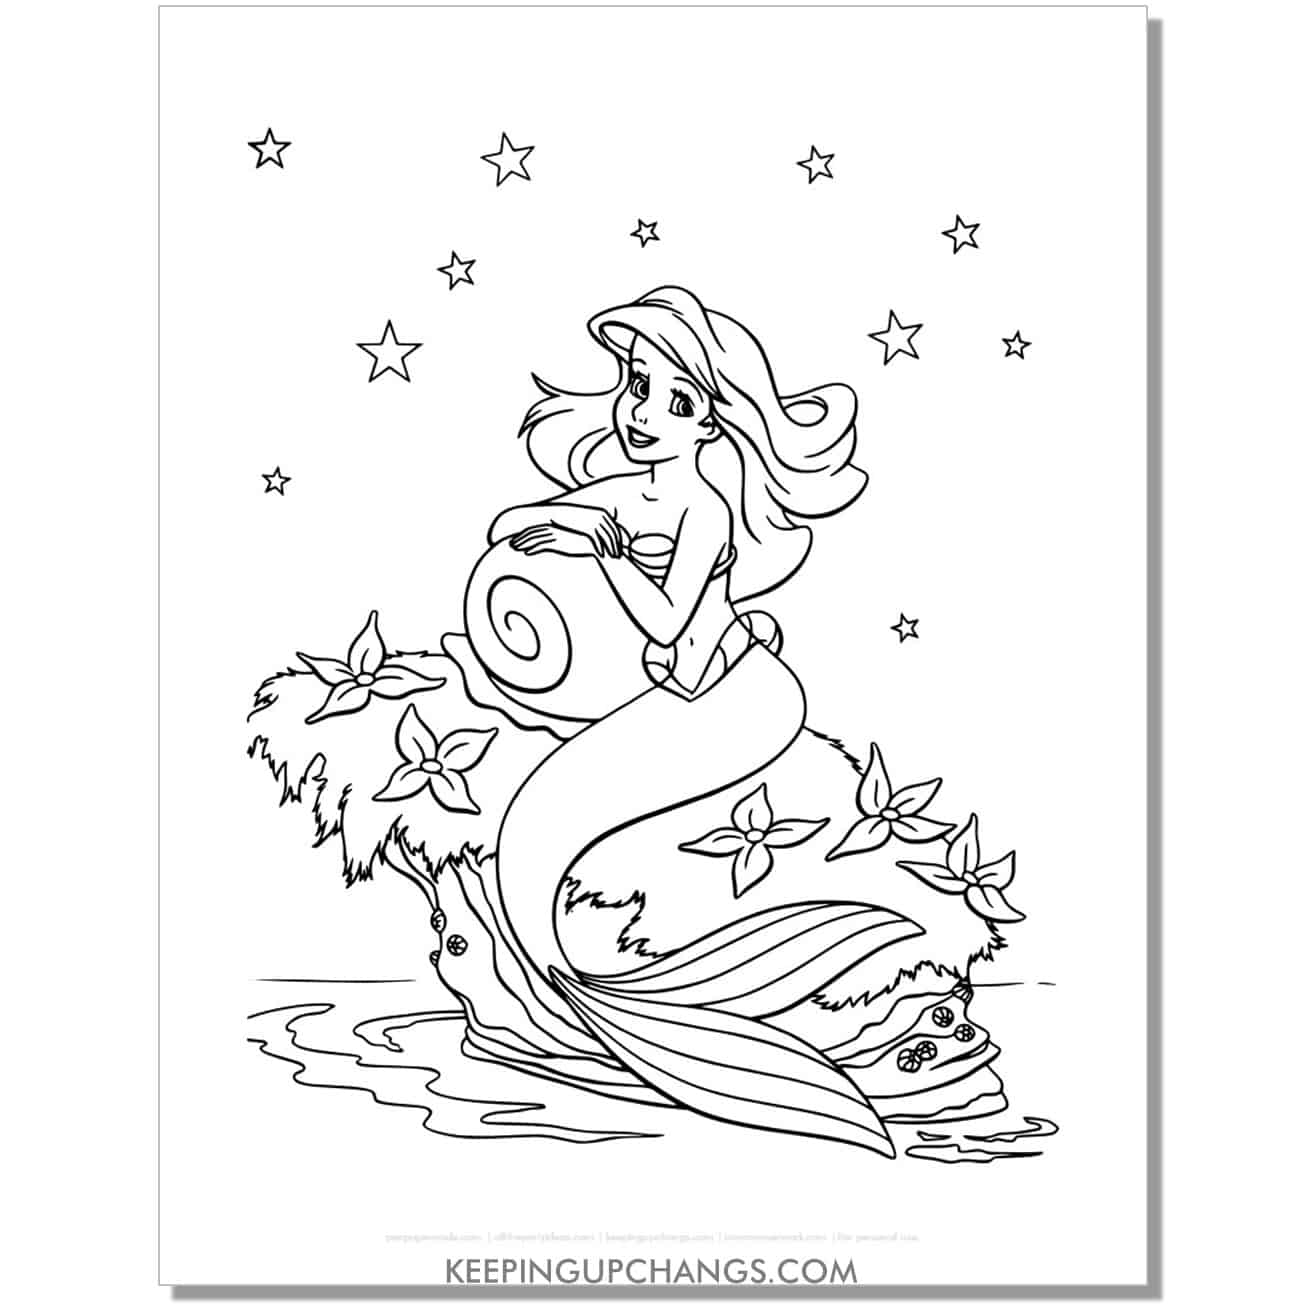 little mermaid ariel resting on island coloring page, sheet.